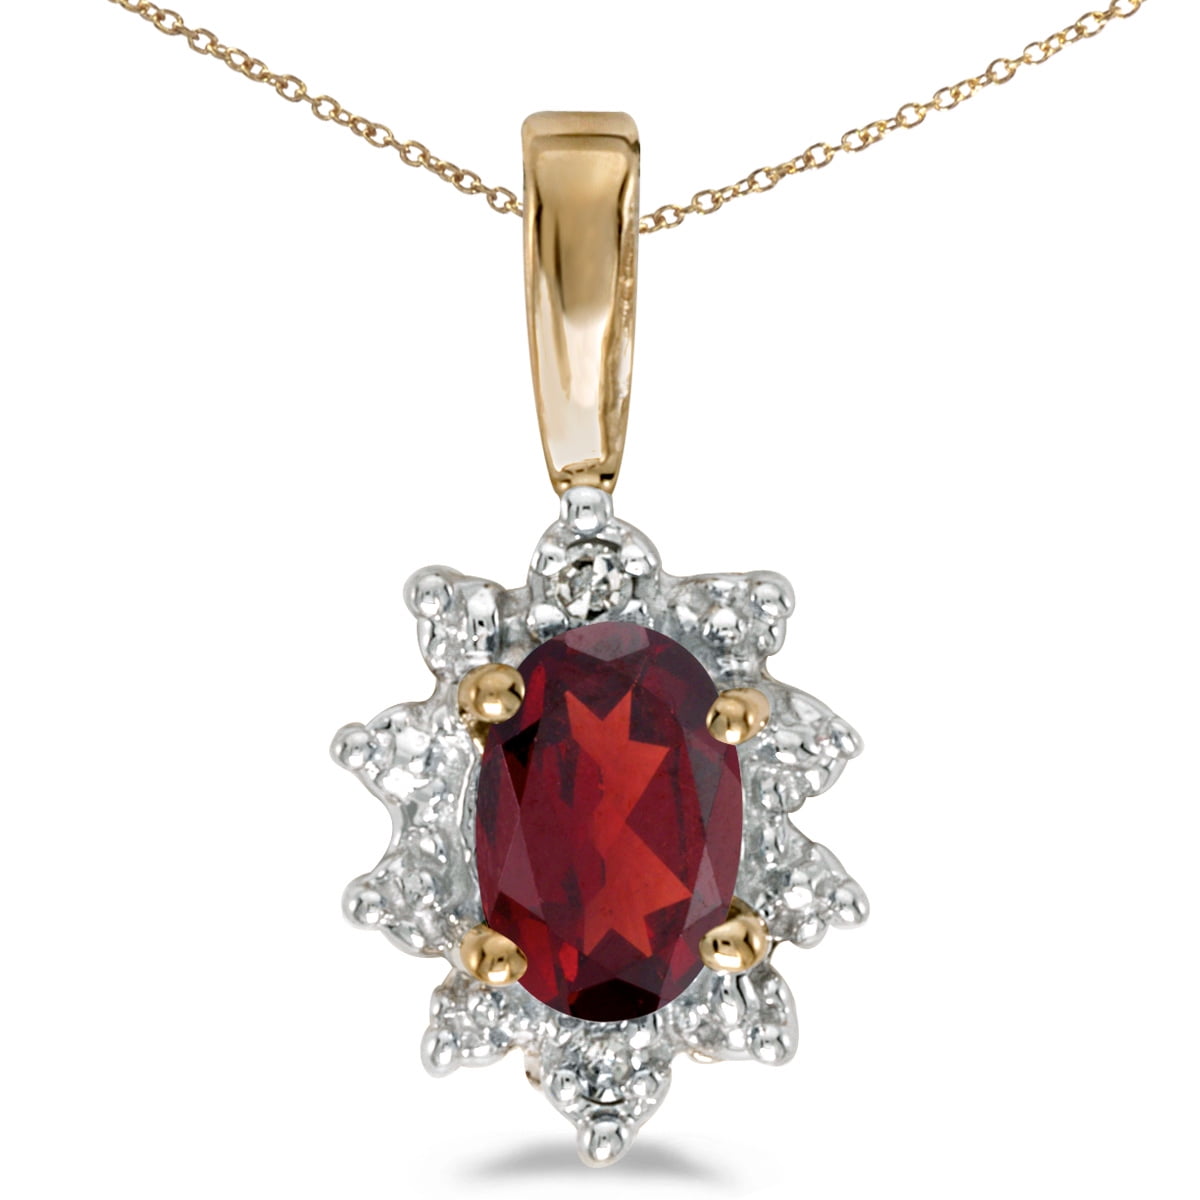 10k Yellow Gold Oval Garnet And Diamond Pendant with 18" Chain 